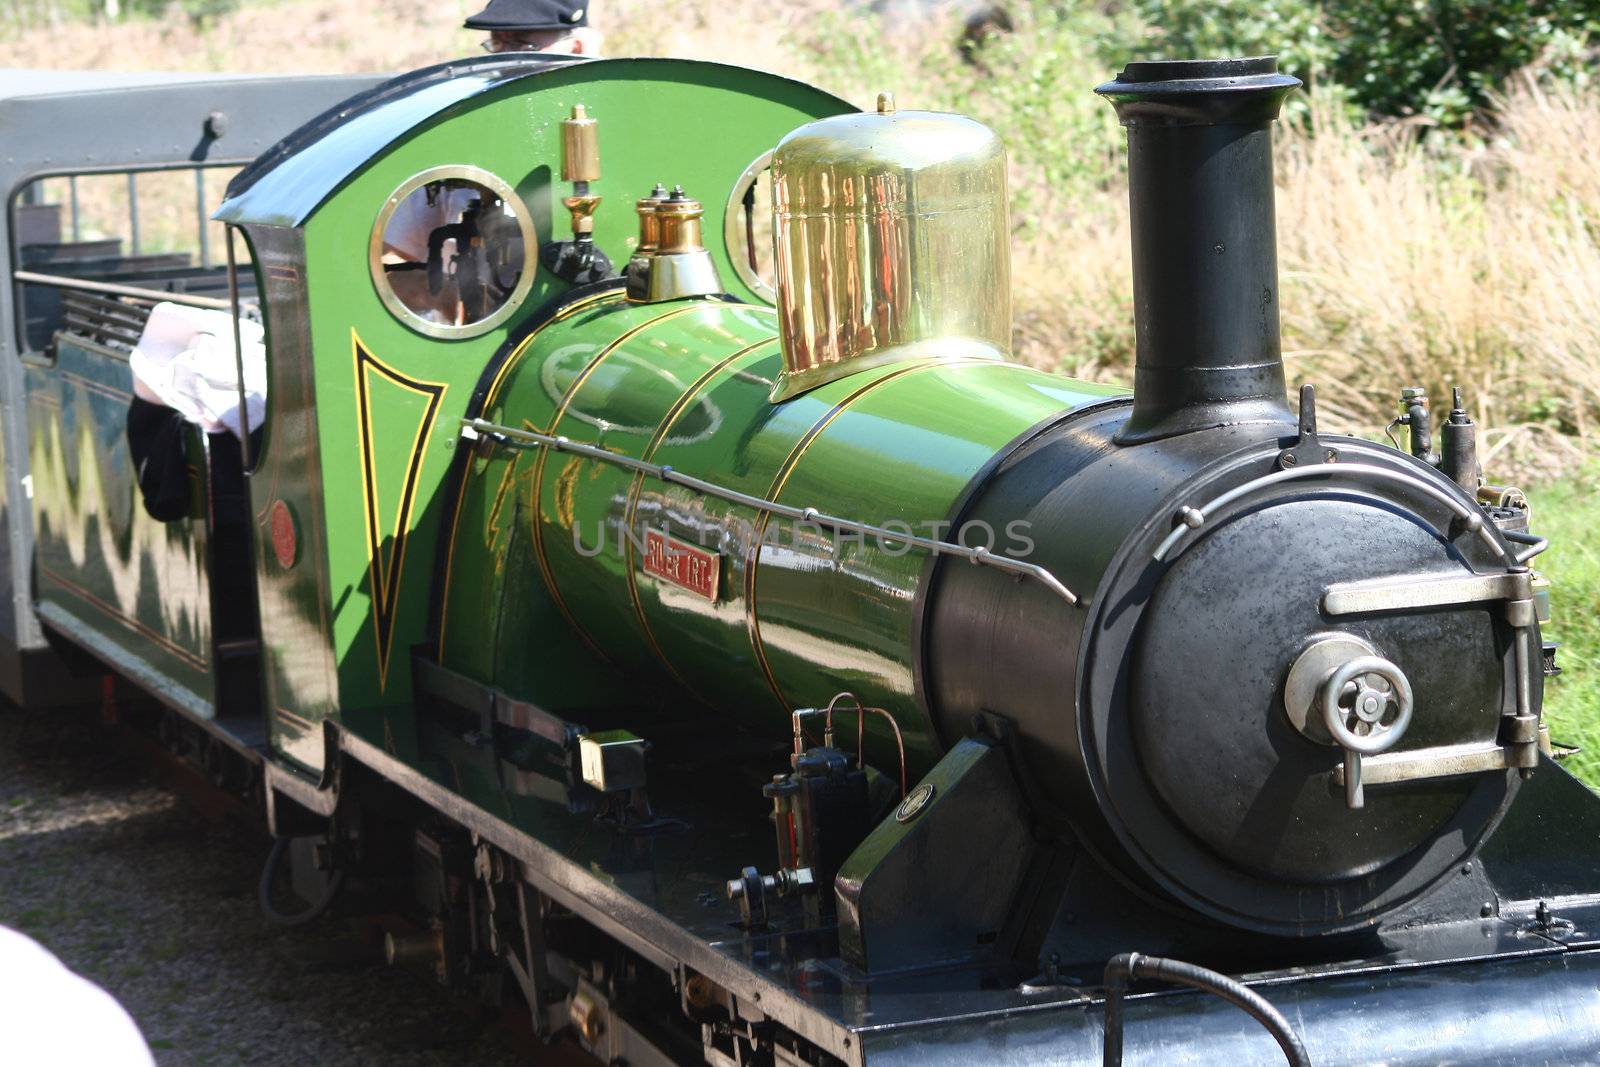 narrow gauge steam train being driven in the countryside